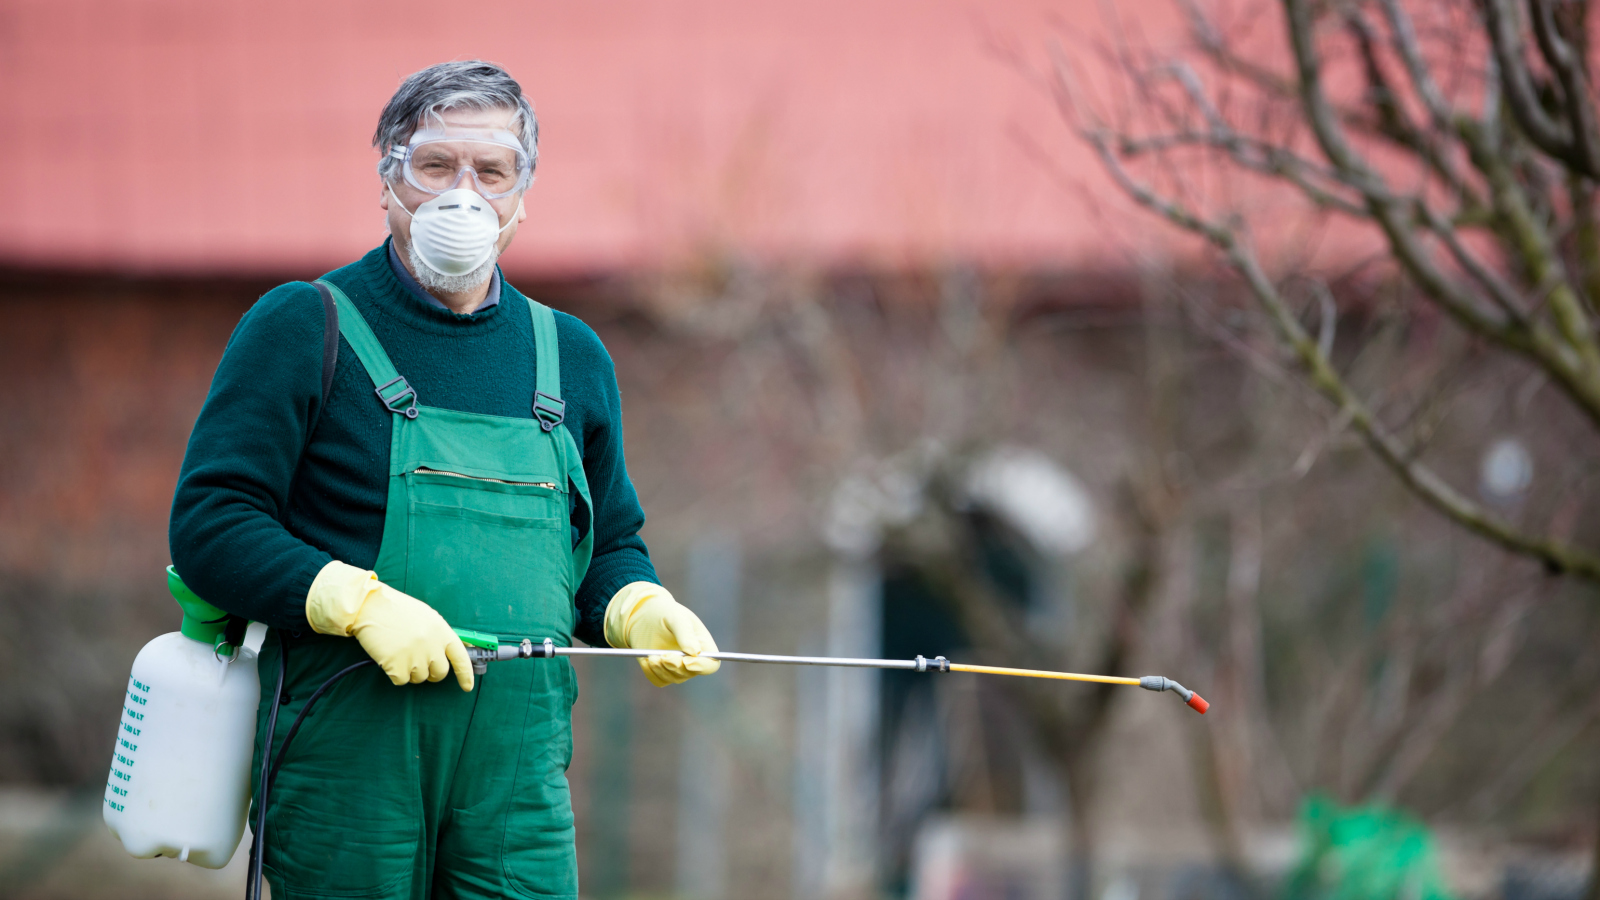 How can I protect myself from a pesticide-spraying neighbor? | Grist